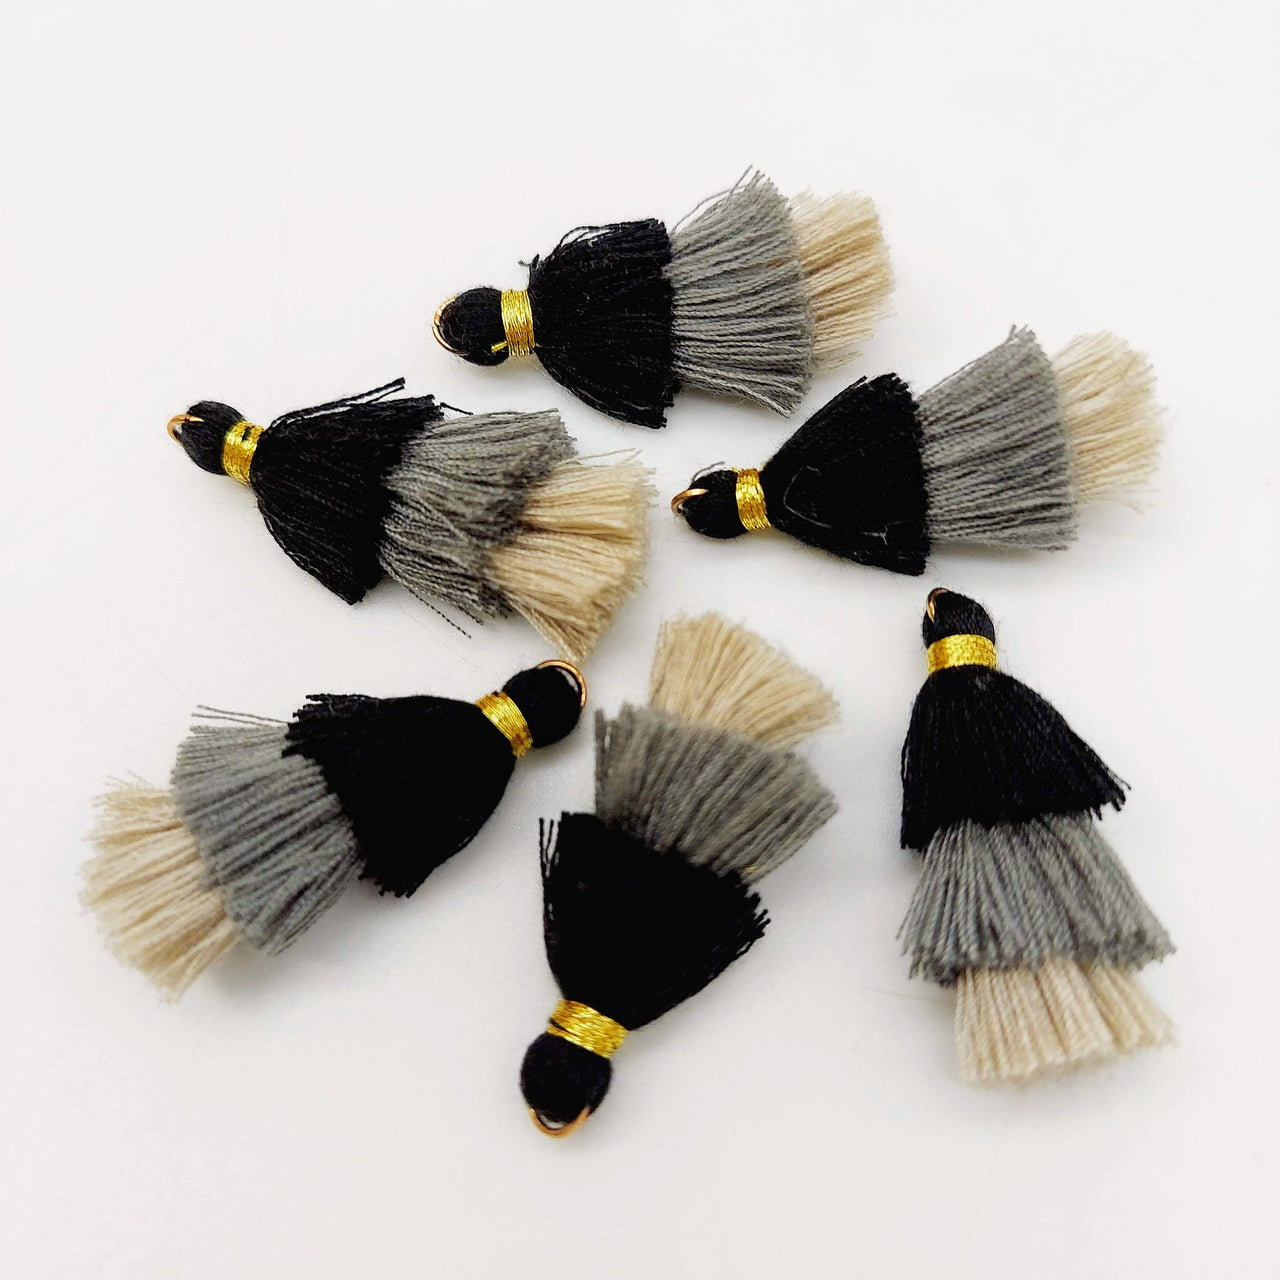 Black, Grey and Beige Small Cotton Tassels in Three Layers With Gold Colour Brass Loop Ring, Tassel Charms x 5